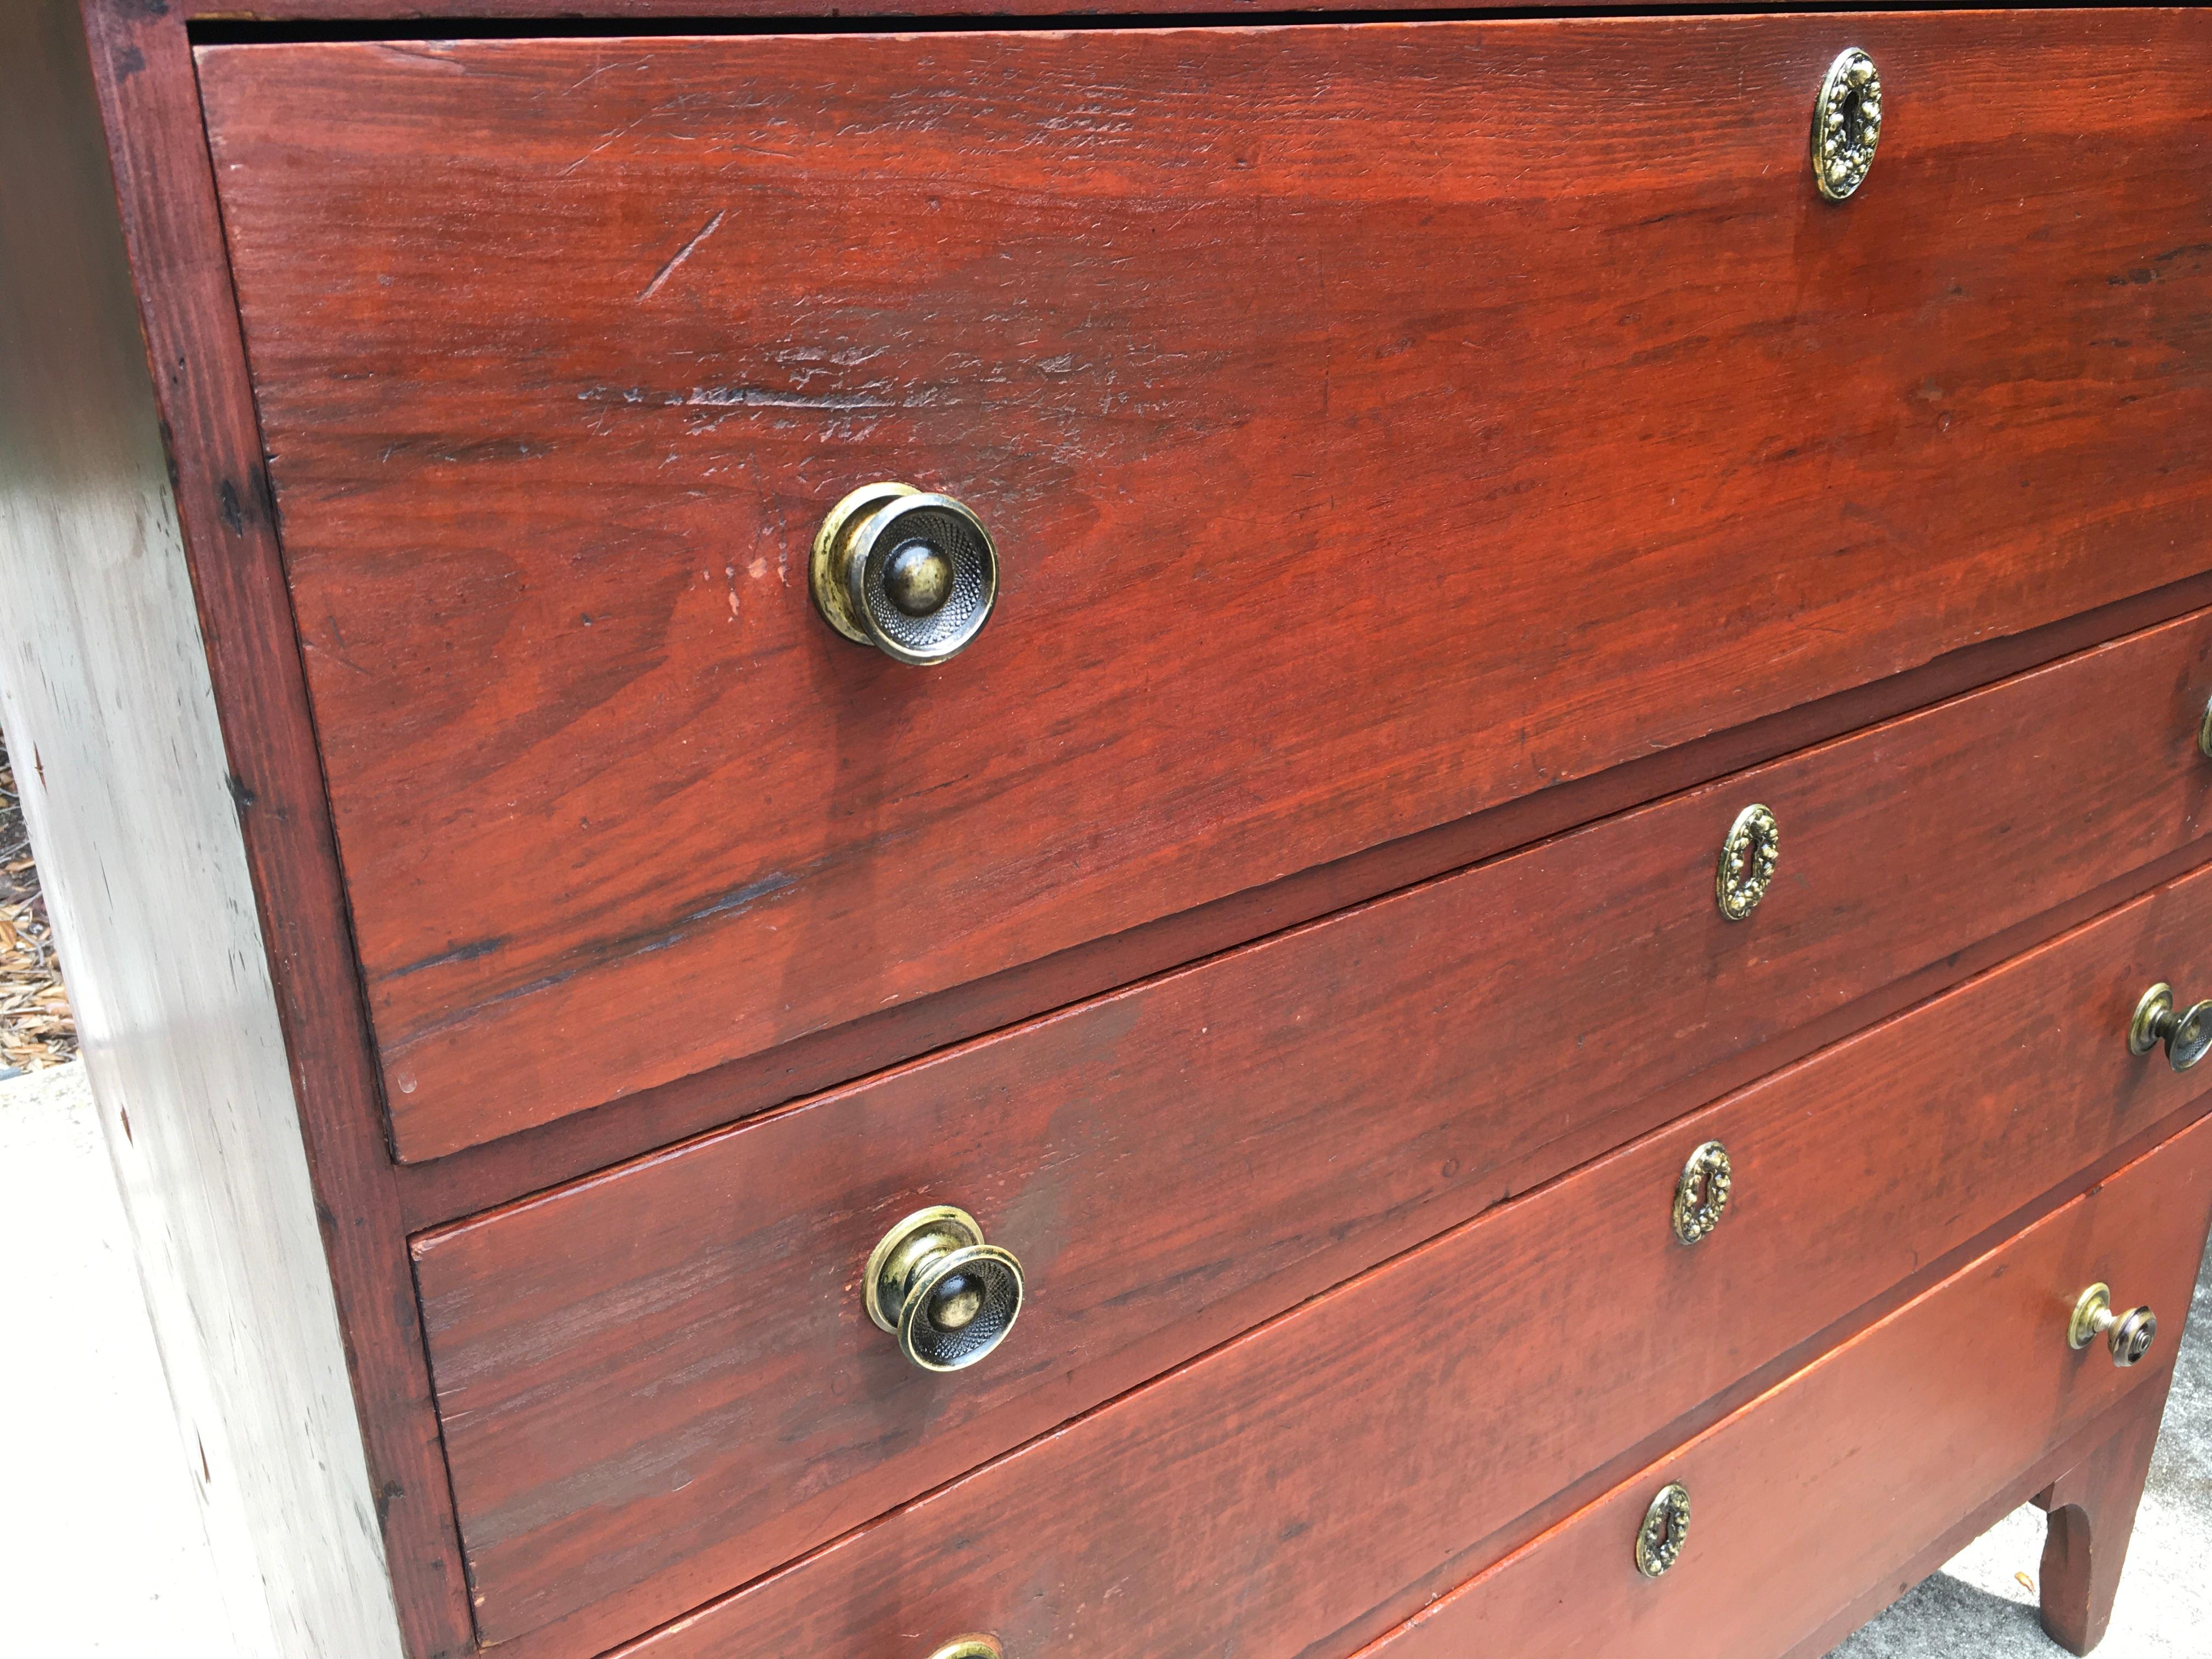 Country Hepplewhite four drawer chest in original red paint of New England origin dating from 1800-1820 standing on tall arched feet. This chest is a fine piece of federal era Americana and is constructed of White Pine and Poplar and retains it’s